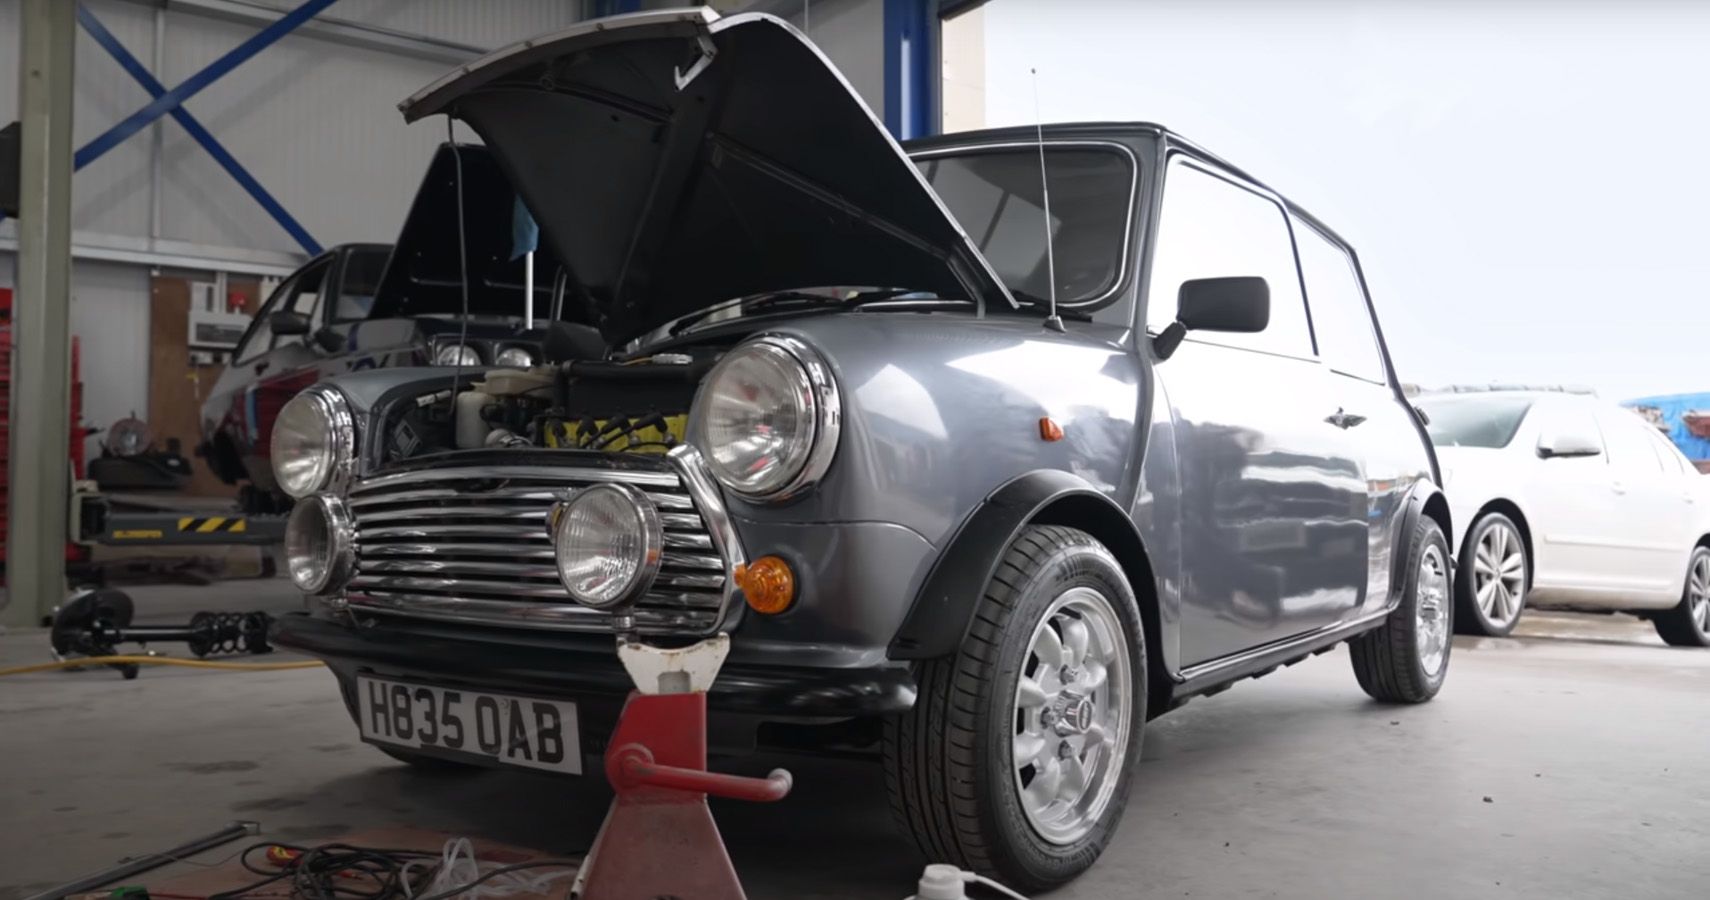 Gray Mini Cooper being repaired in garage